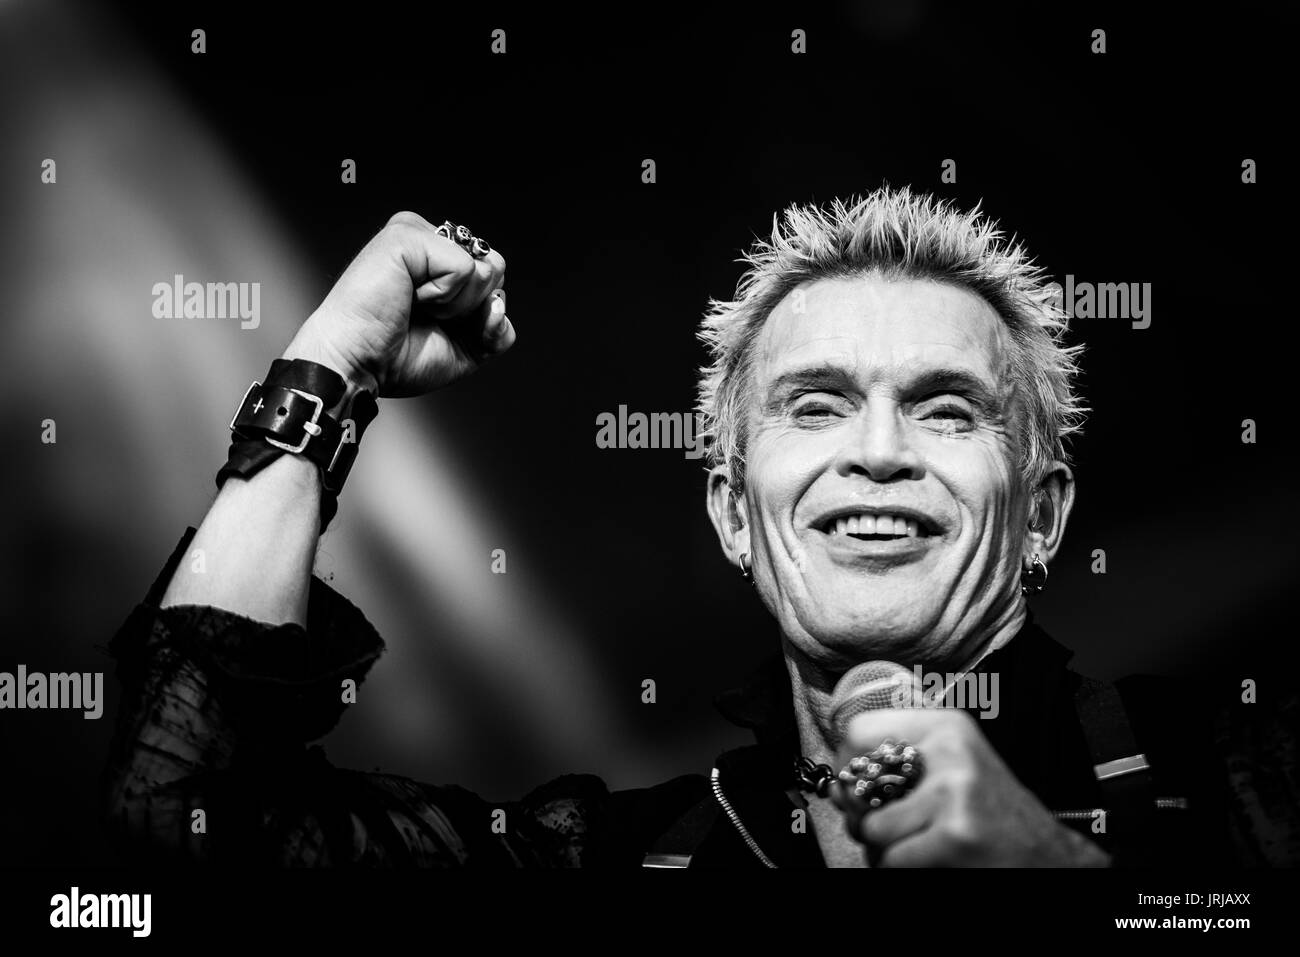 Billy Idol performing at a music festival in British Columbia Canada in black and white. Stock Photo